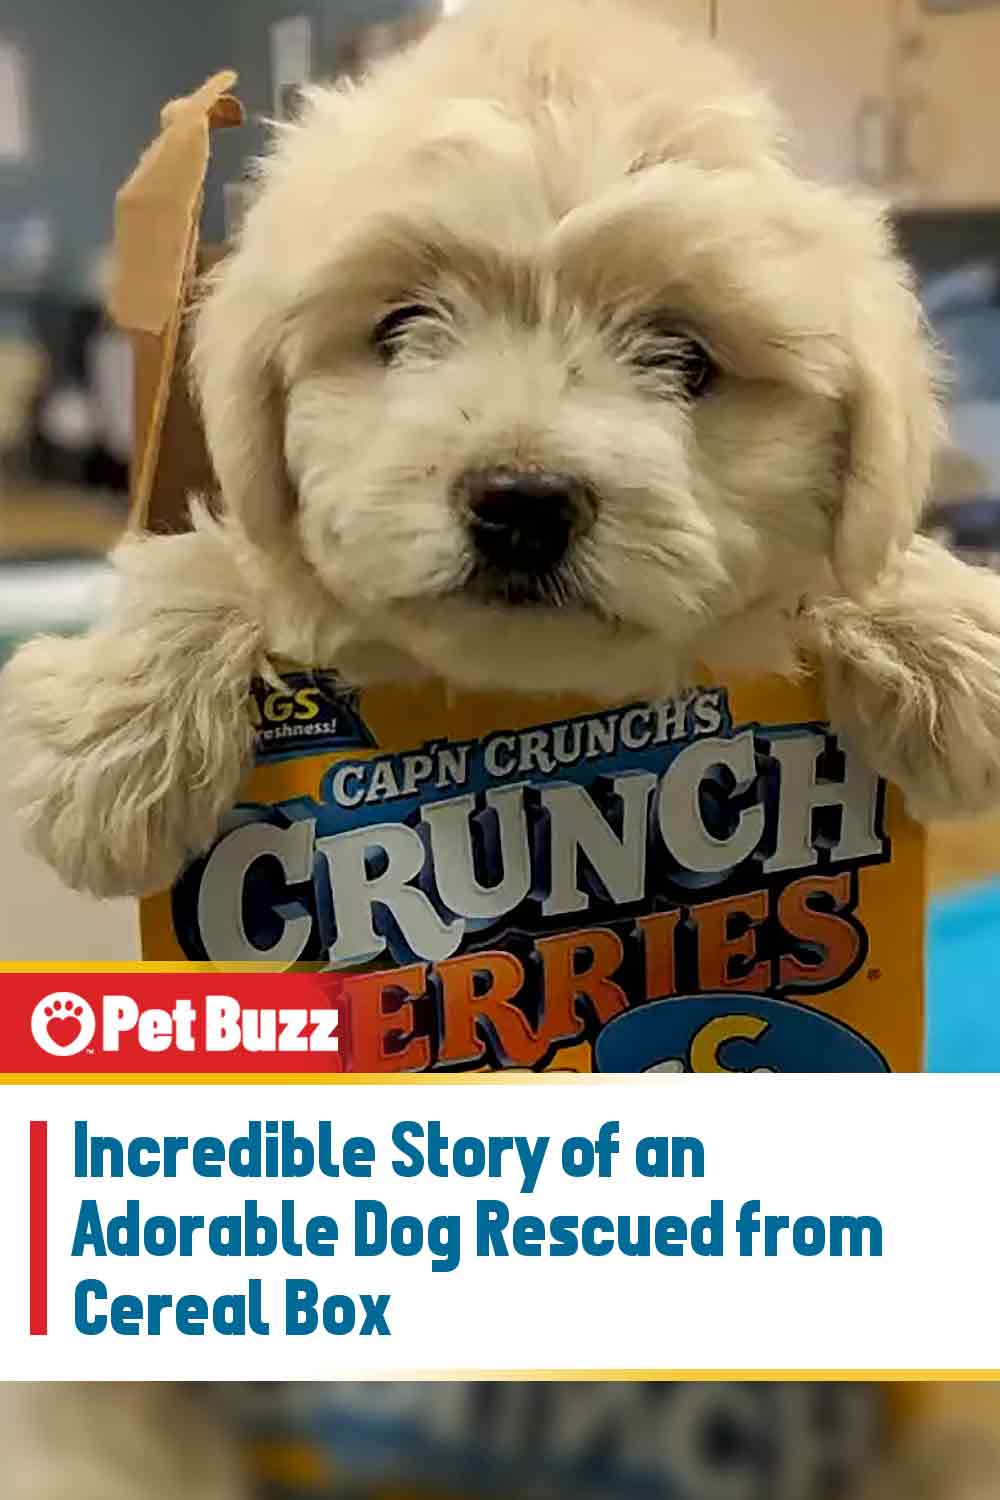 Incredible Story of an Adorable Dog Rescued from Cereal Box